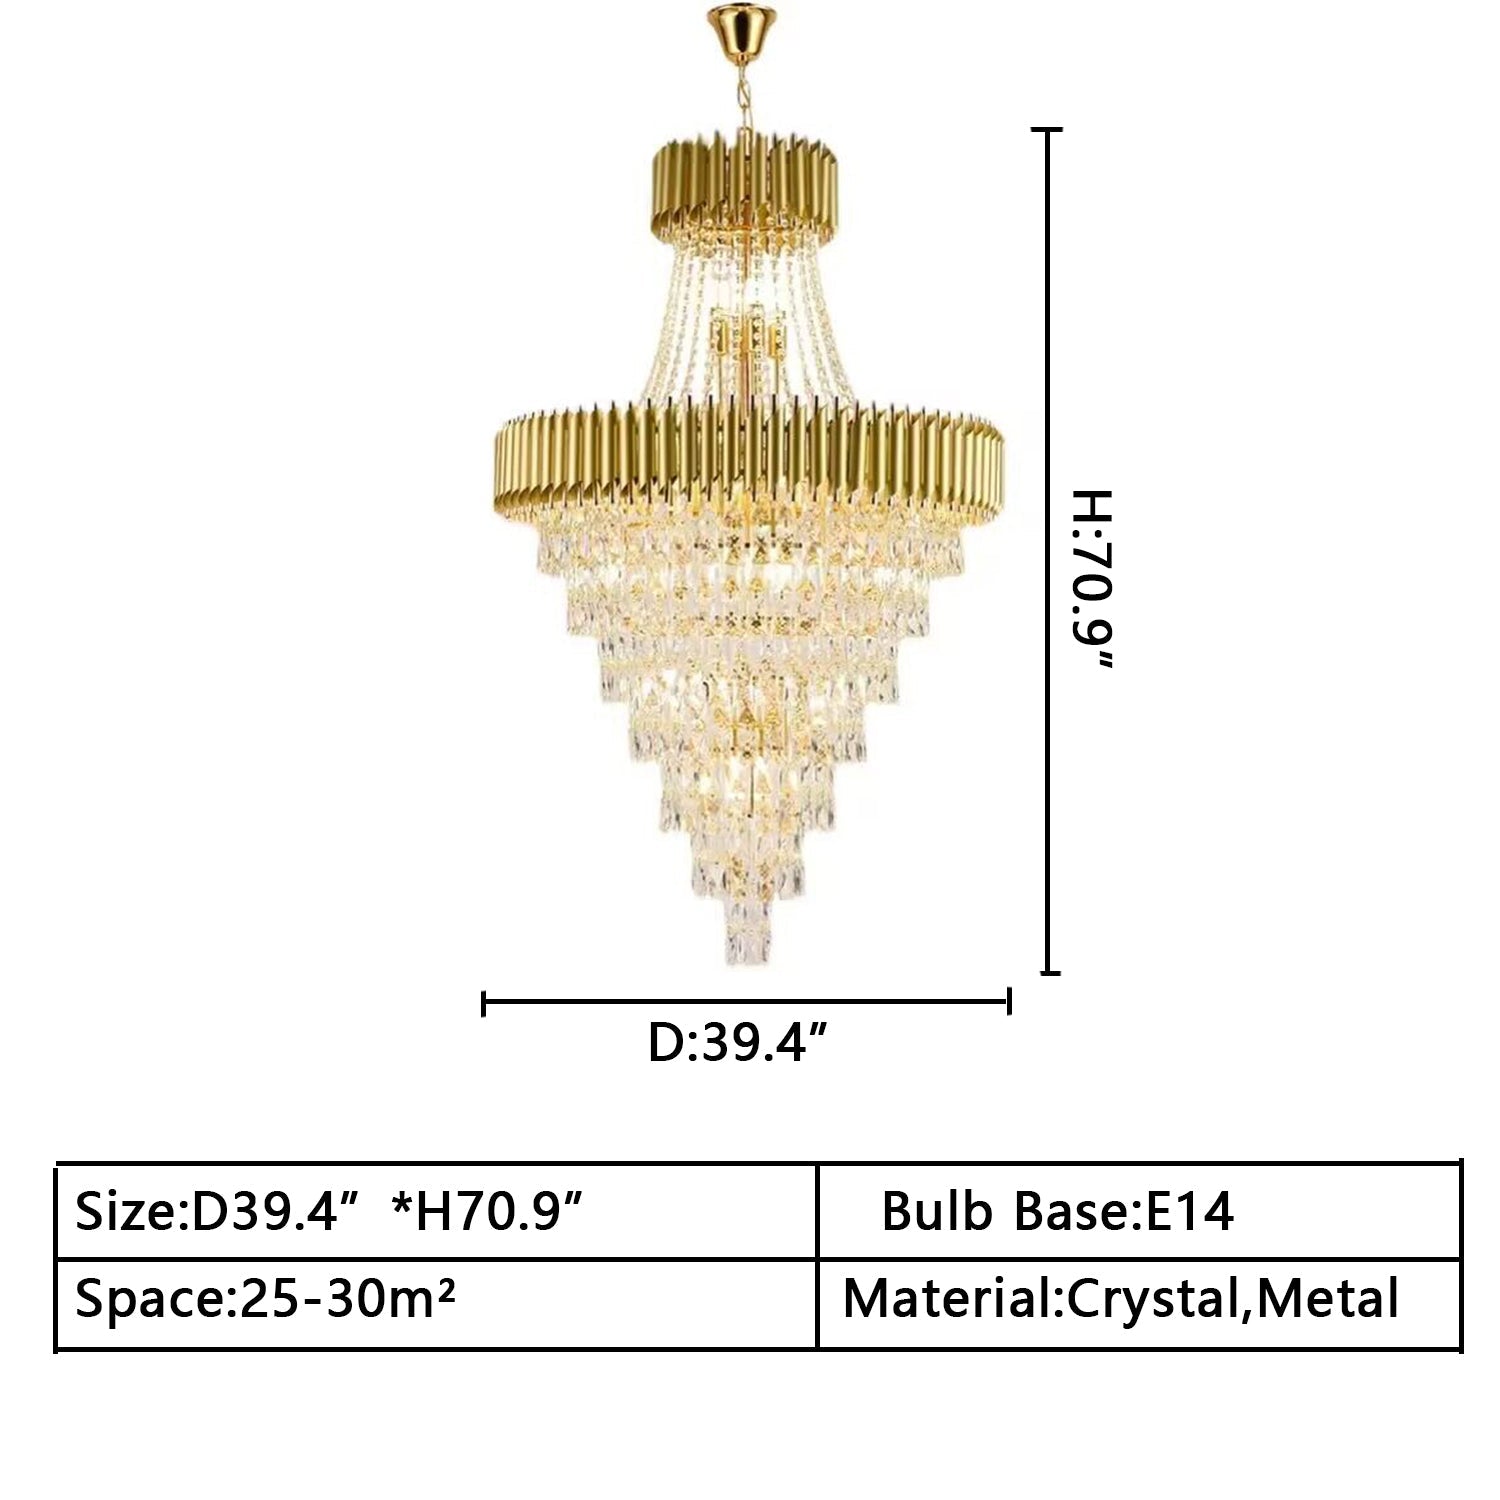 d39.4inches*h70.9inches extra large/huge/oversized lUXURY modern black/gold crystal chandelier multi-layer foyer,staircase light fixture